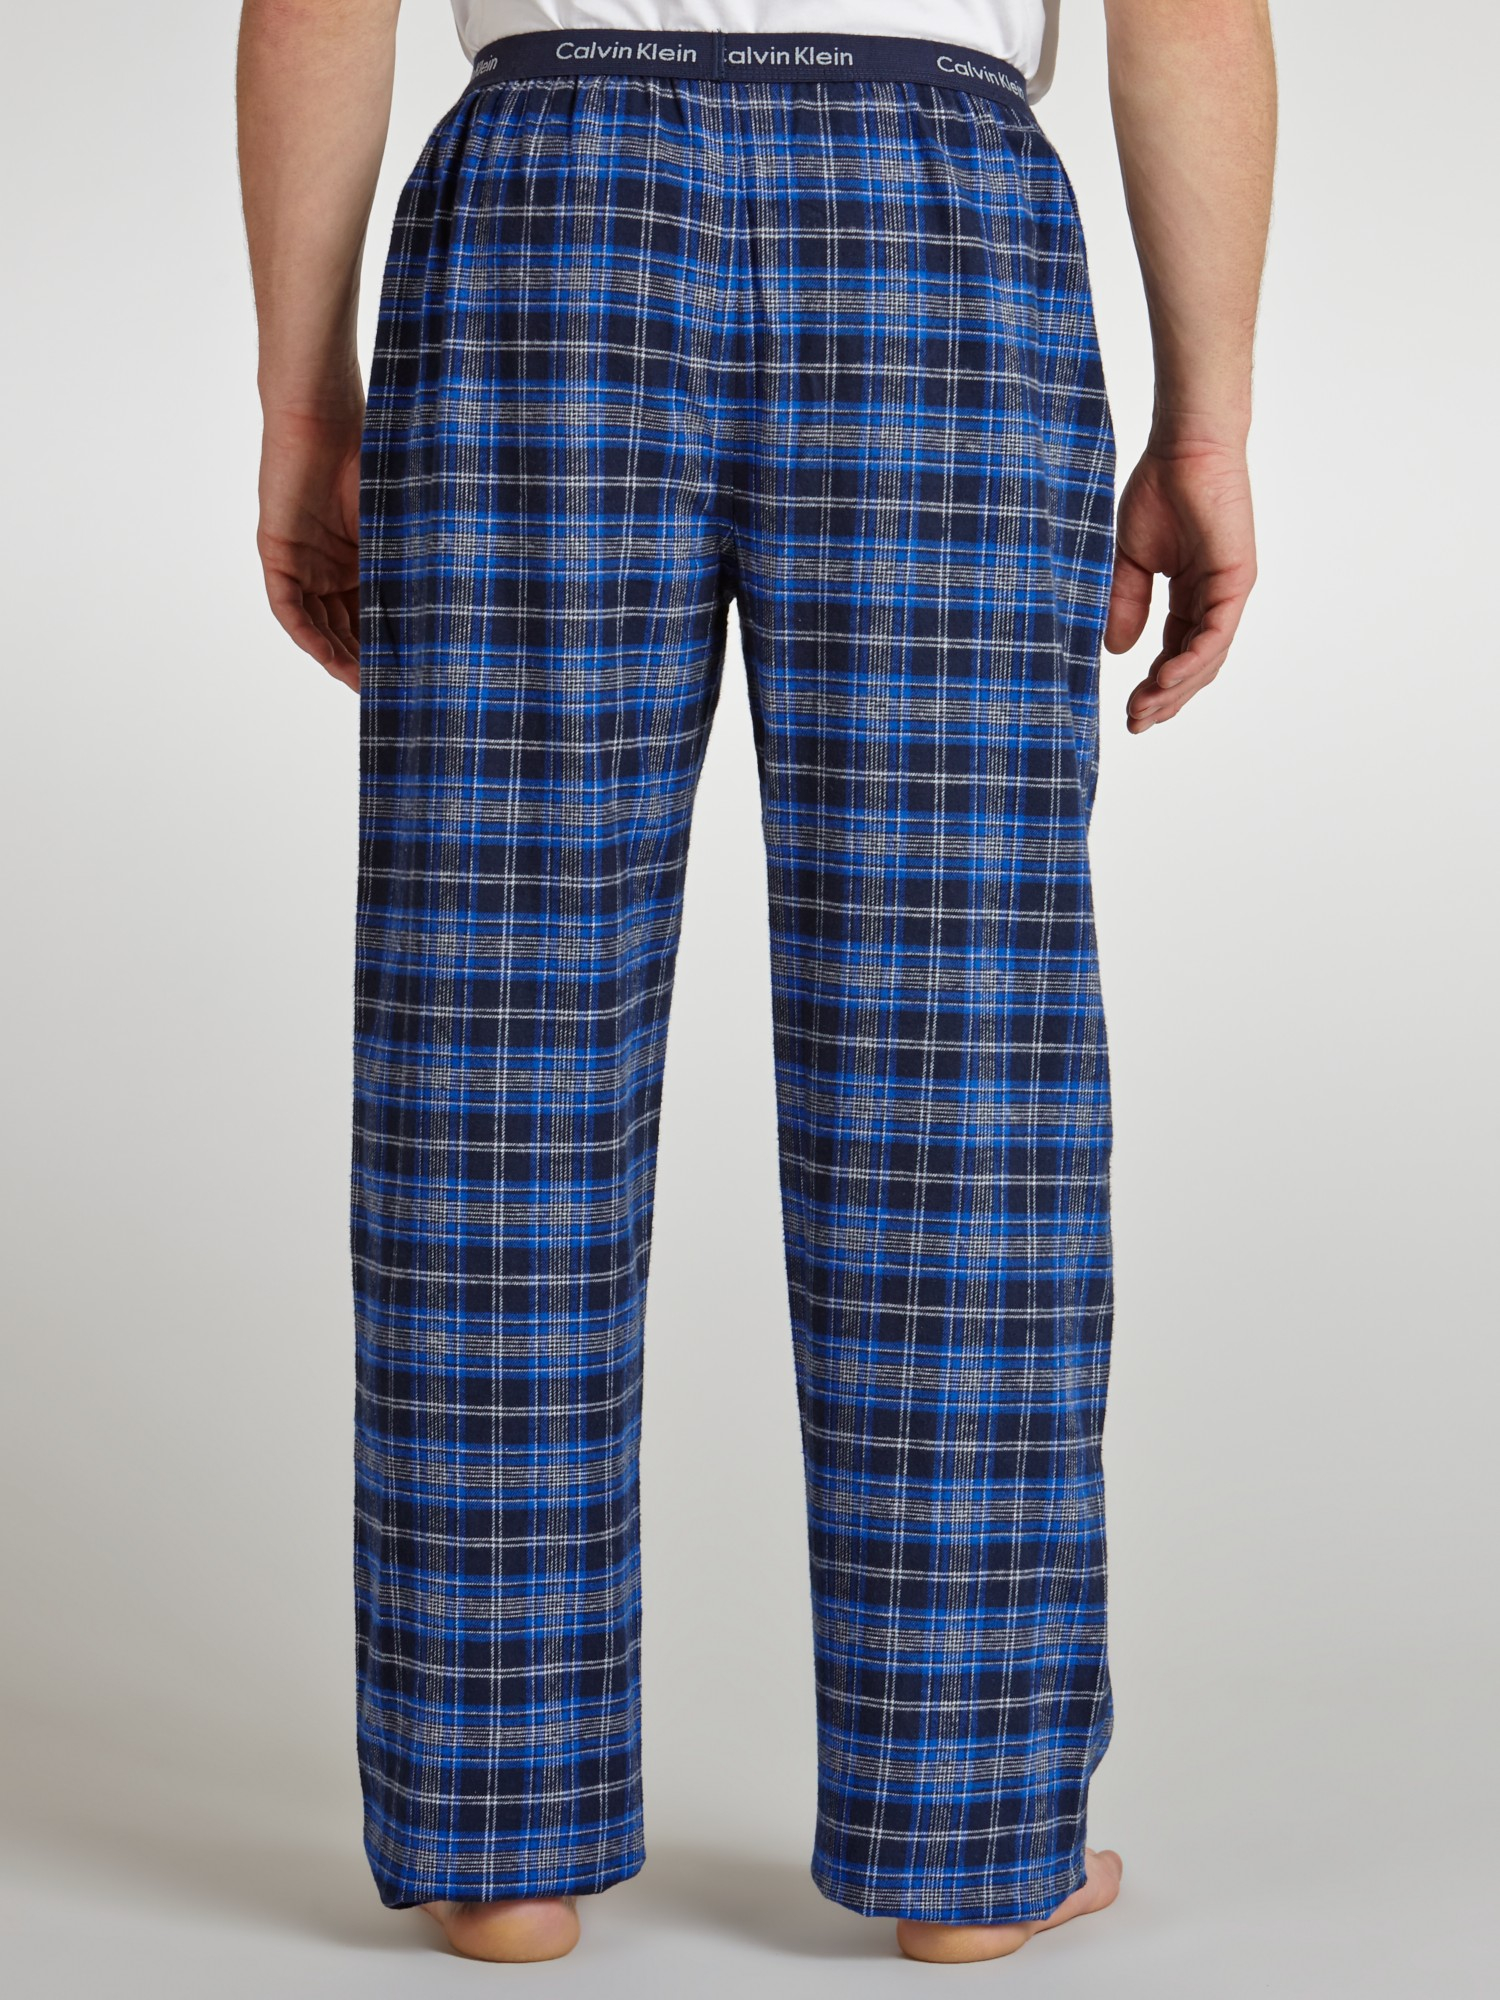 Calvin Klein Flannel Pajama Pants | livewire.thewire.in